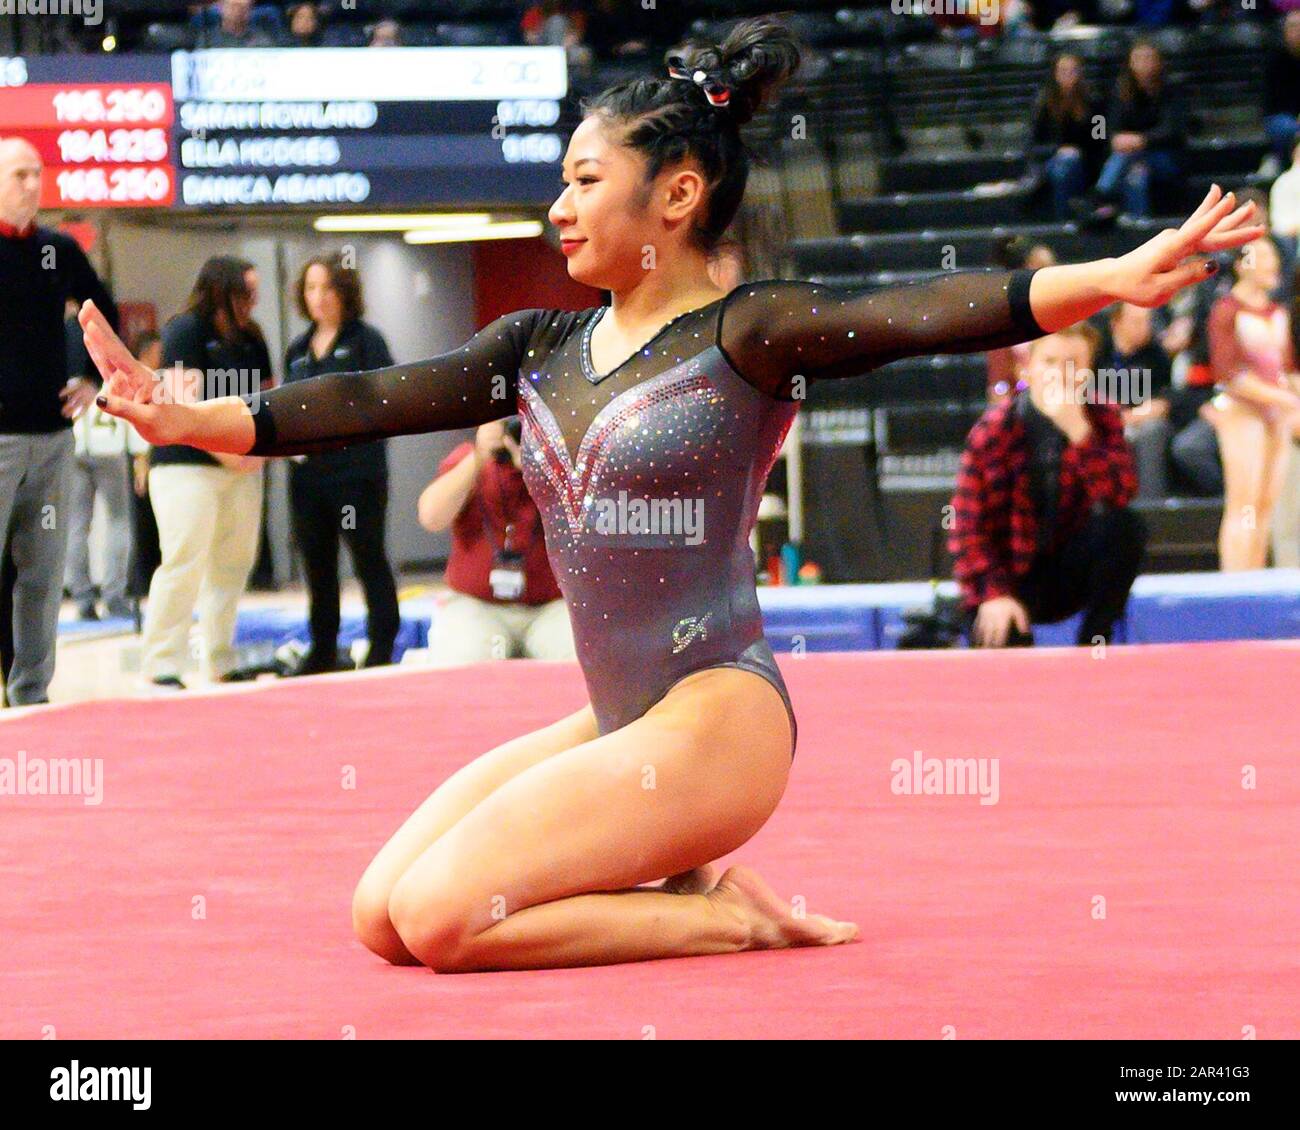 Columbus, Ohio, USA. 25th Jan, 2020. Ohio State Buckeyes Danica Abanto competes in the floor exercise against Central Michigan and Maryland in their meet in Columbus, Ohio. Brent Clark/CSM/Alamy Live News Stock Photo